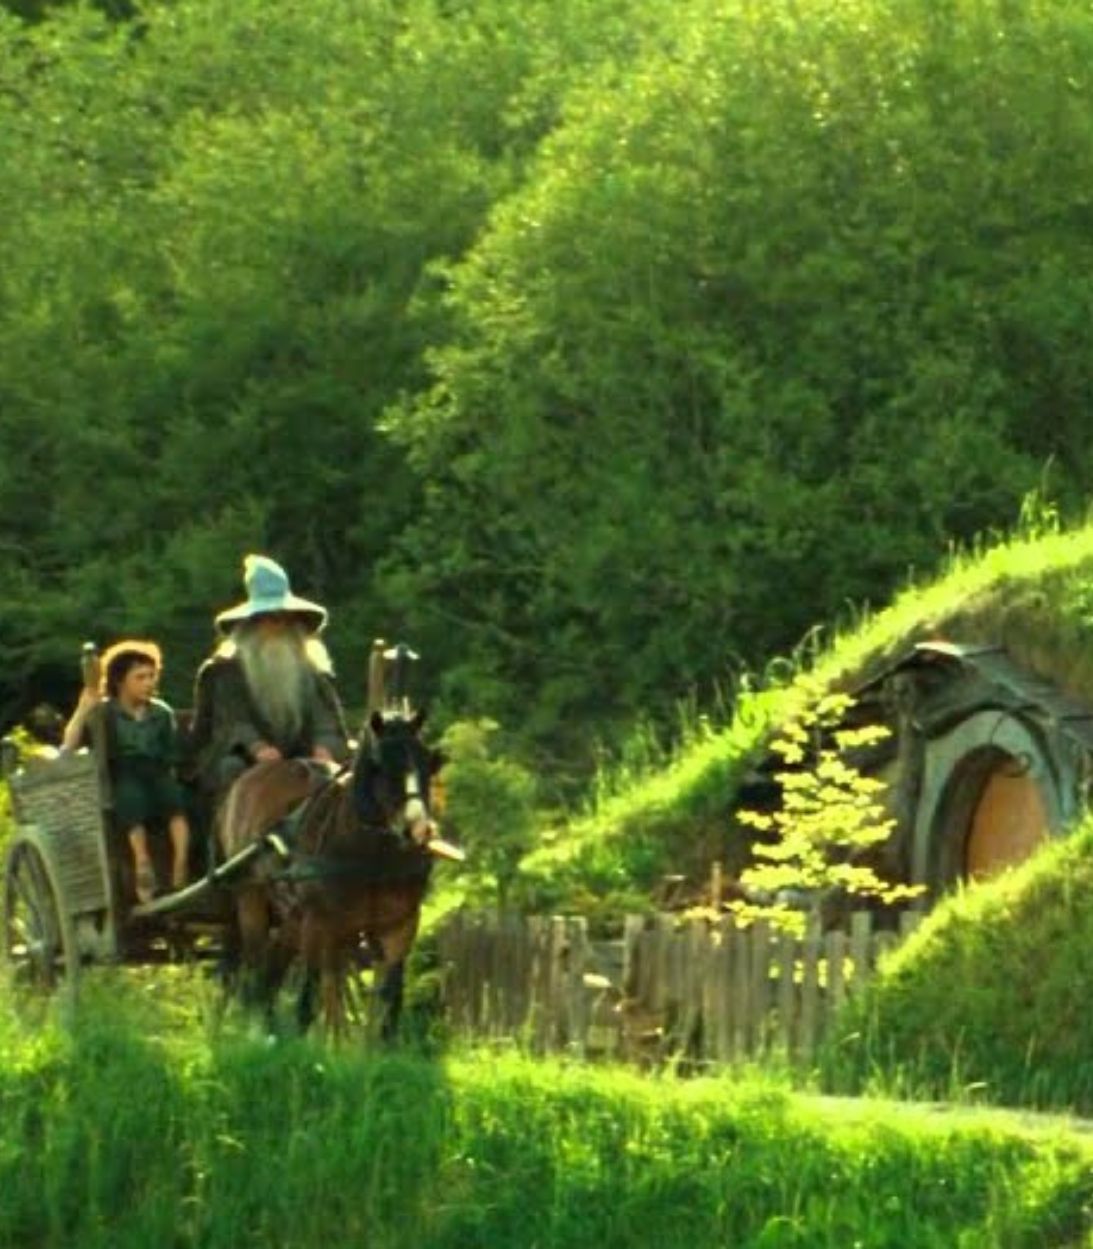 The Best Character Moments in The Lord of the Rings, Ranked